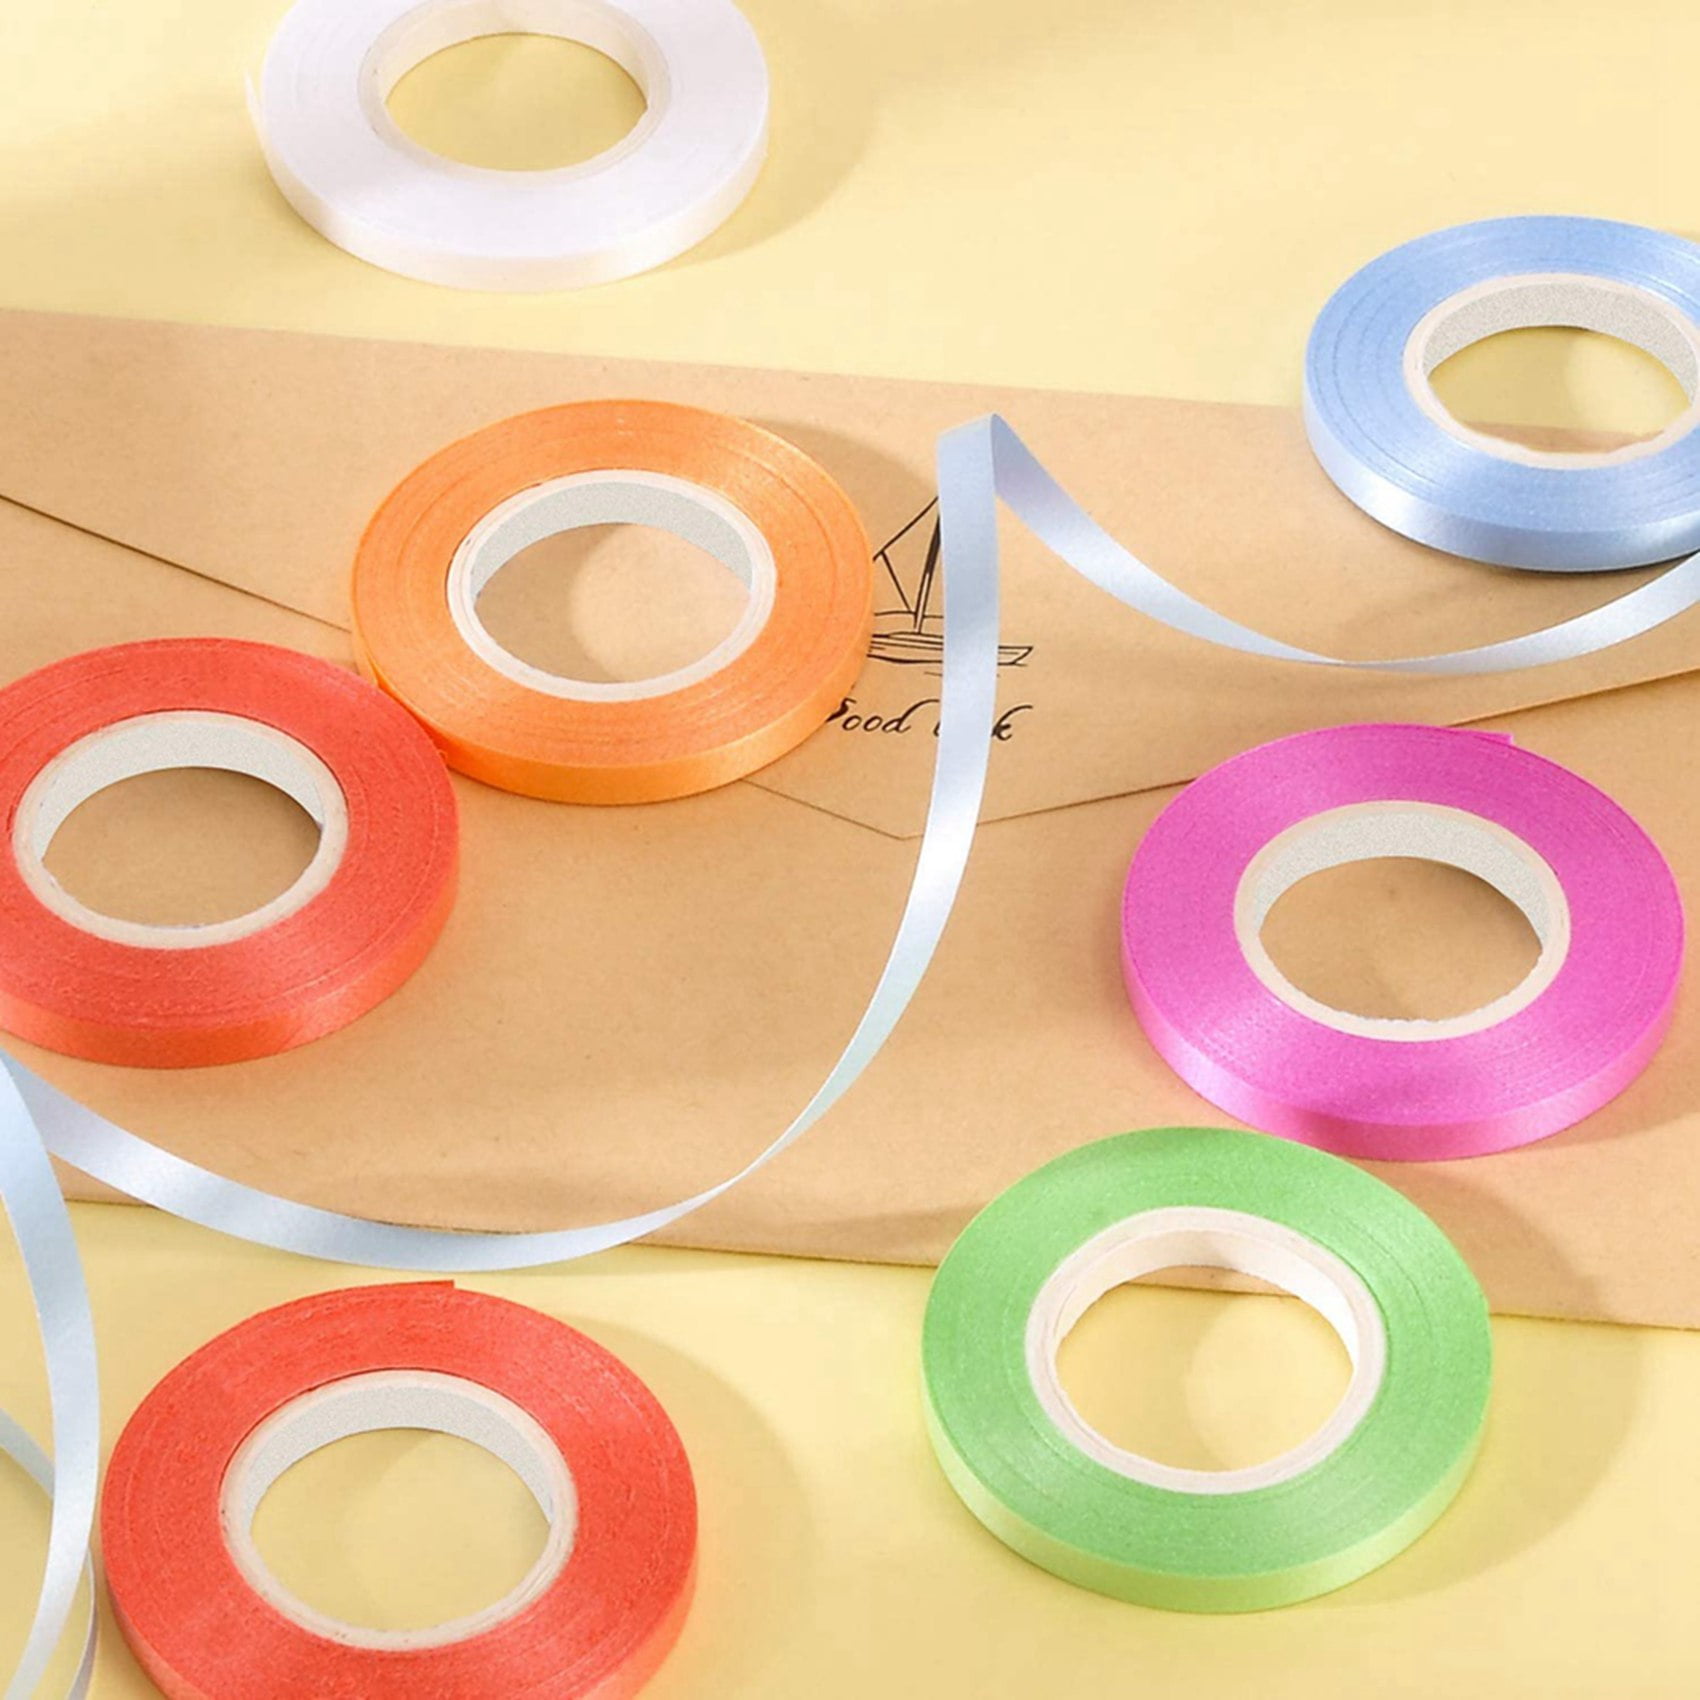 200 METERS BALLOON CURLING RIBBON FOR PARTY GIFT WRAPPING BALLOONS STRING  TIE